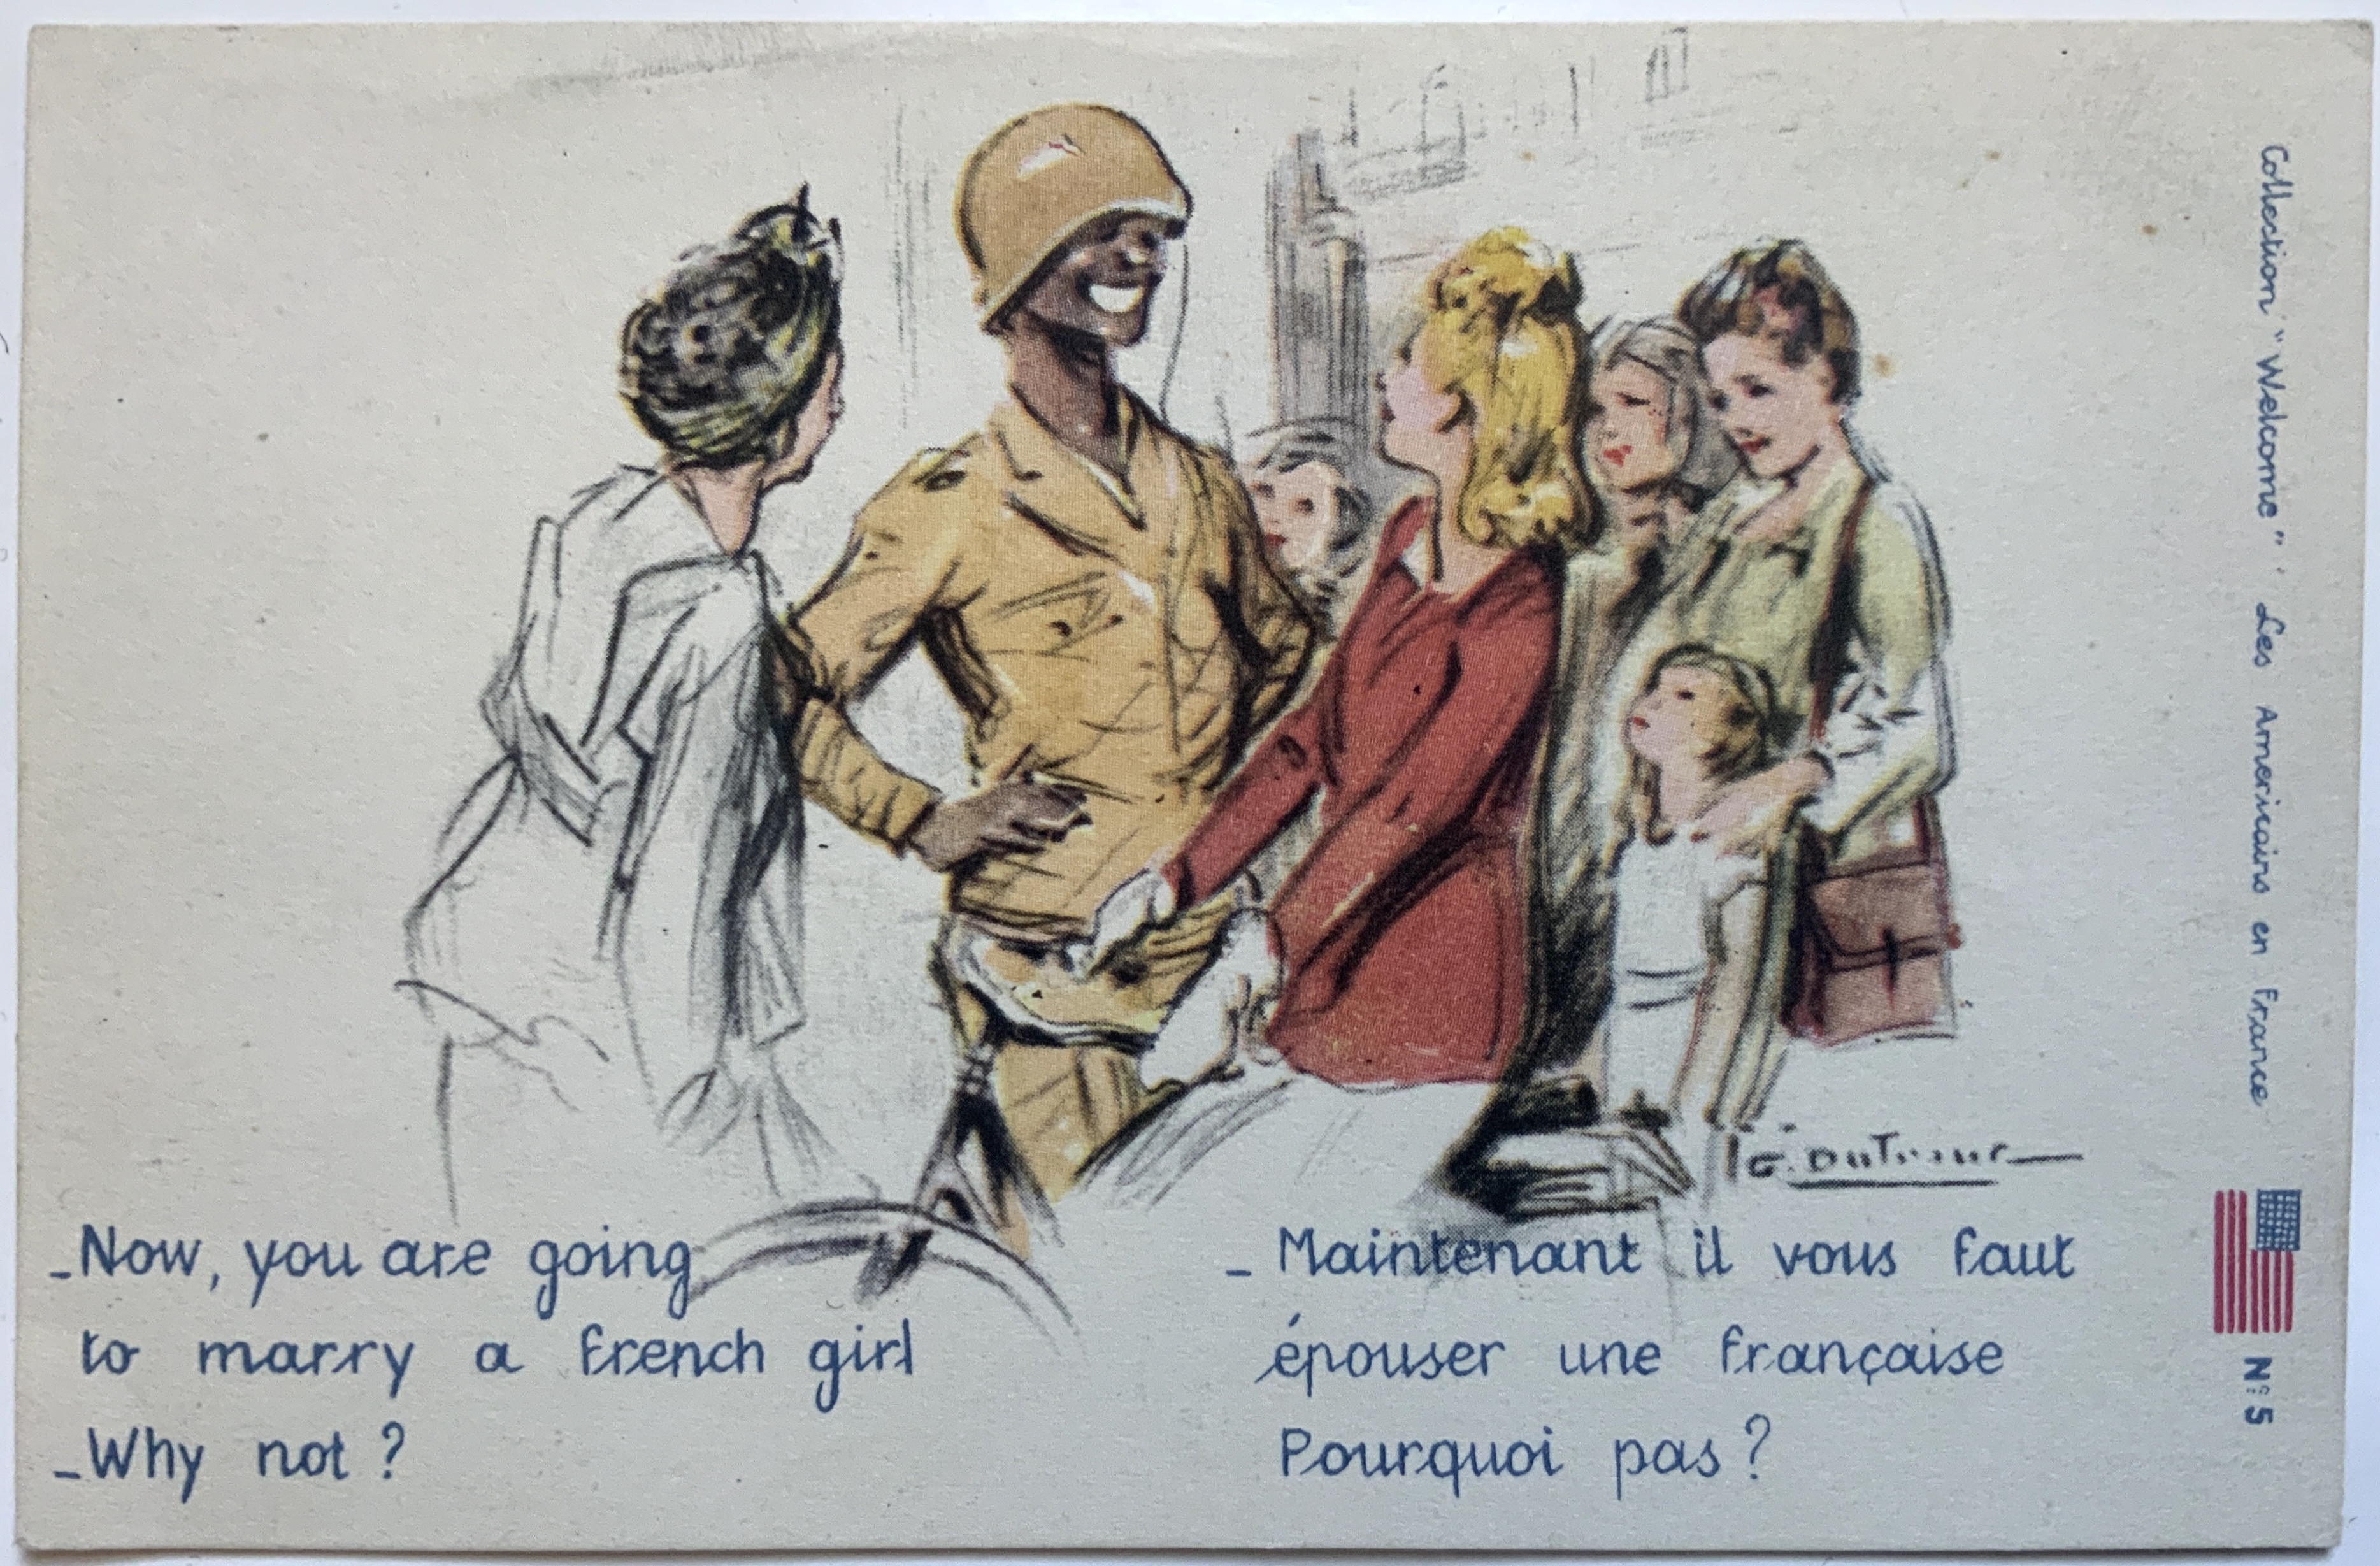 J948	RARE AFRO-AMERICAN SOLDIER POSTCARD - OCCUPIED FRANCE 1945